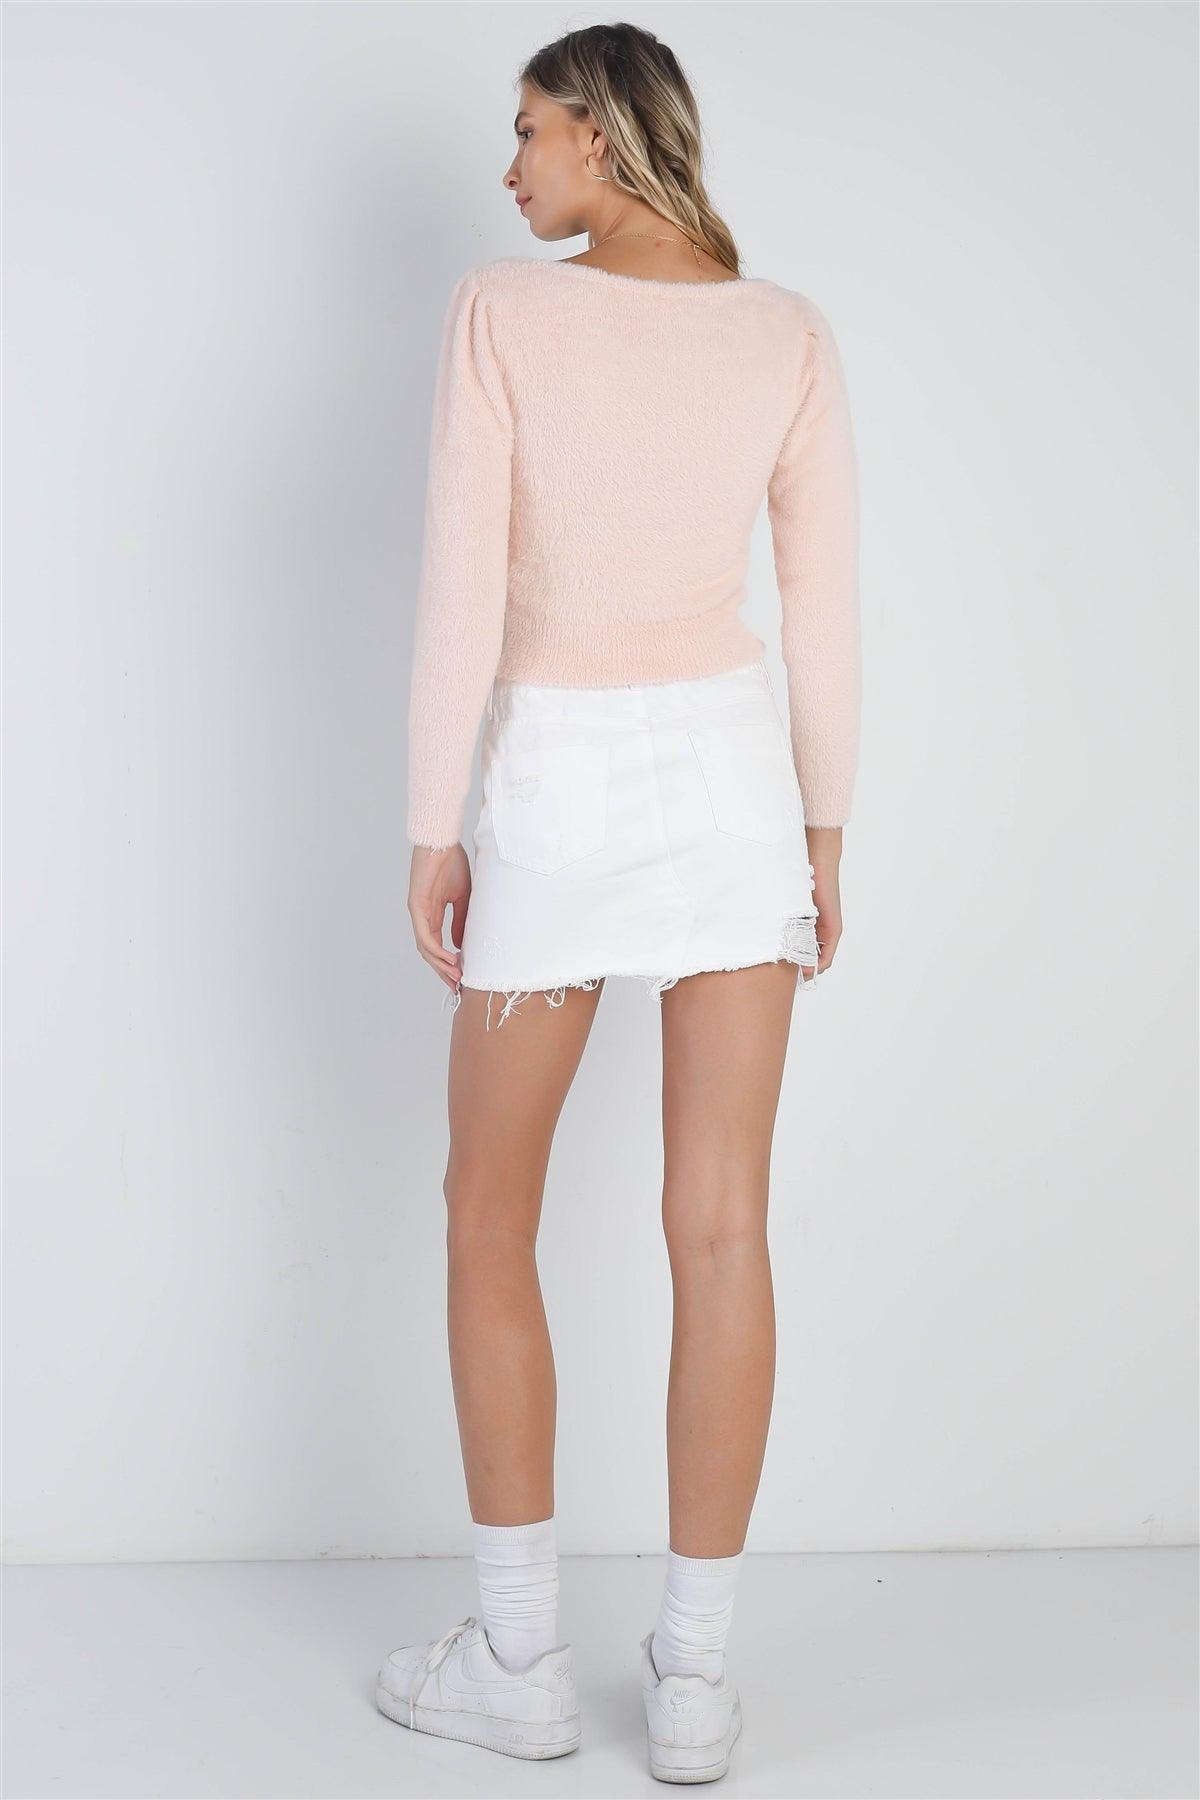 Blush Fluffy Square Neck Long Sleeve Sweater /4-1-1